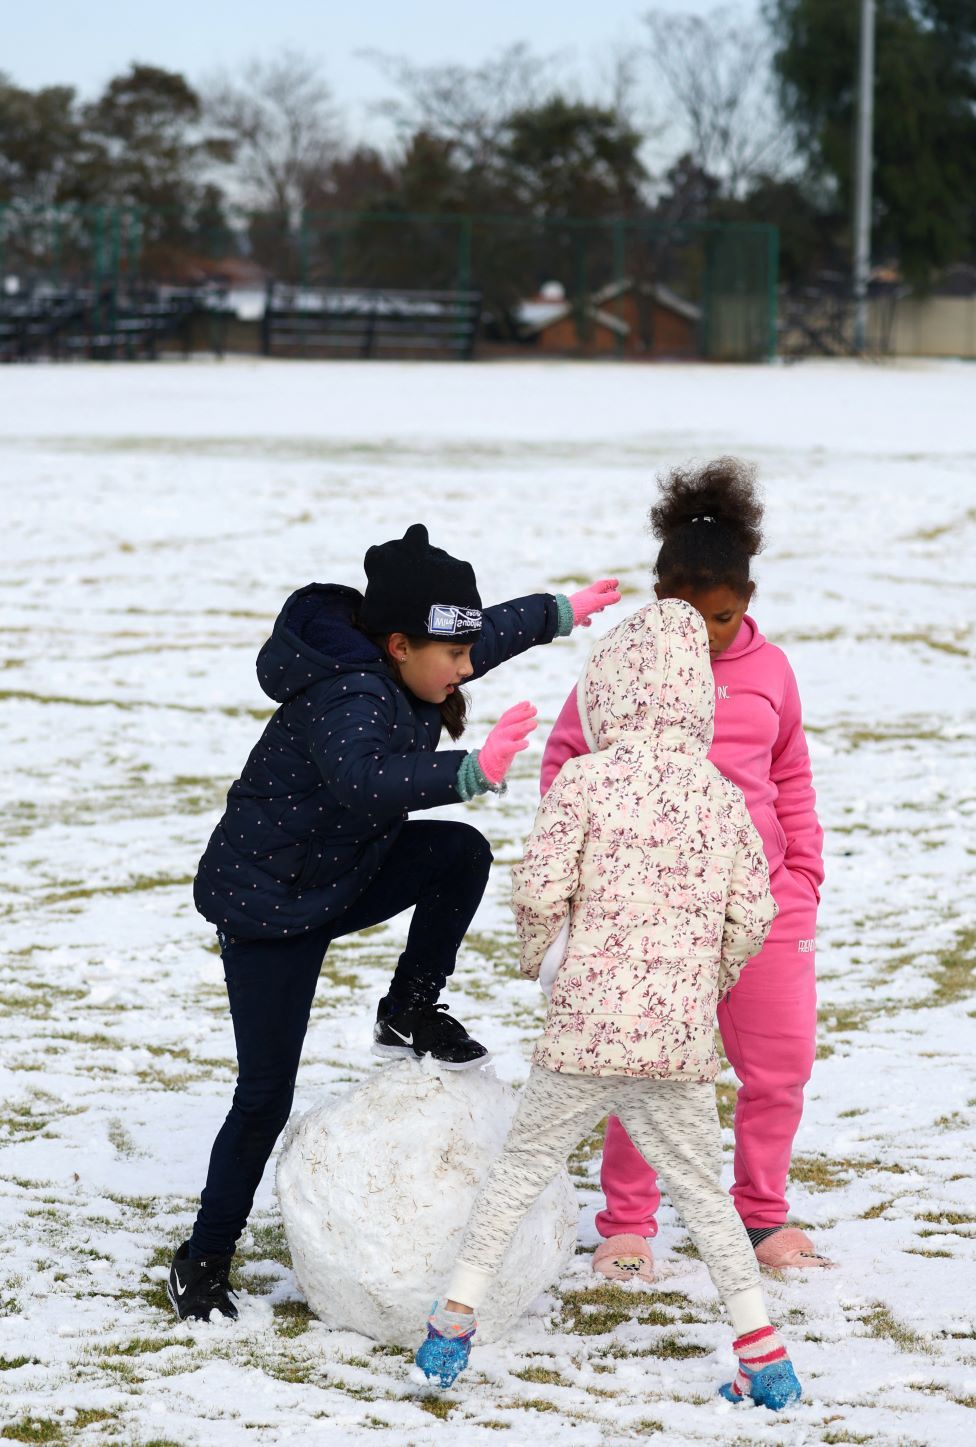 Girls play with a large snow ball at a school in Brackenhurst, south of Johannesburg, on 10 July.